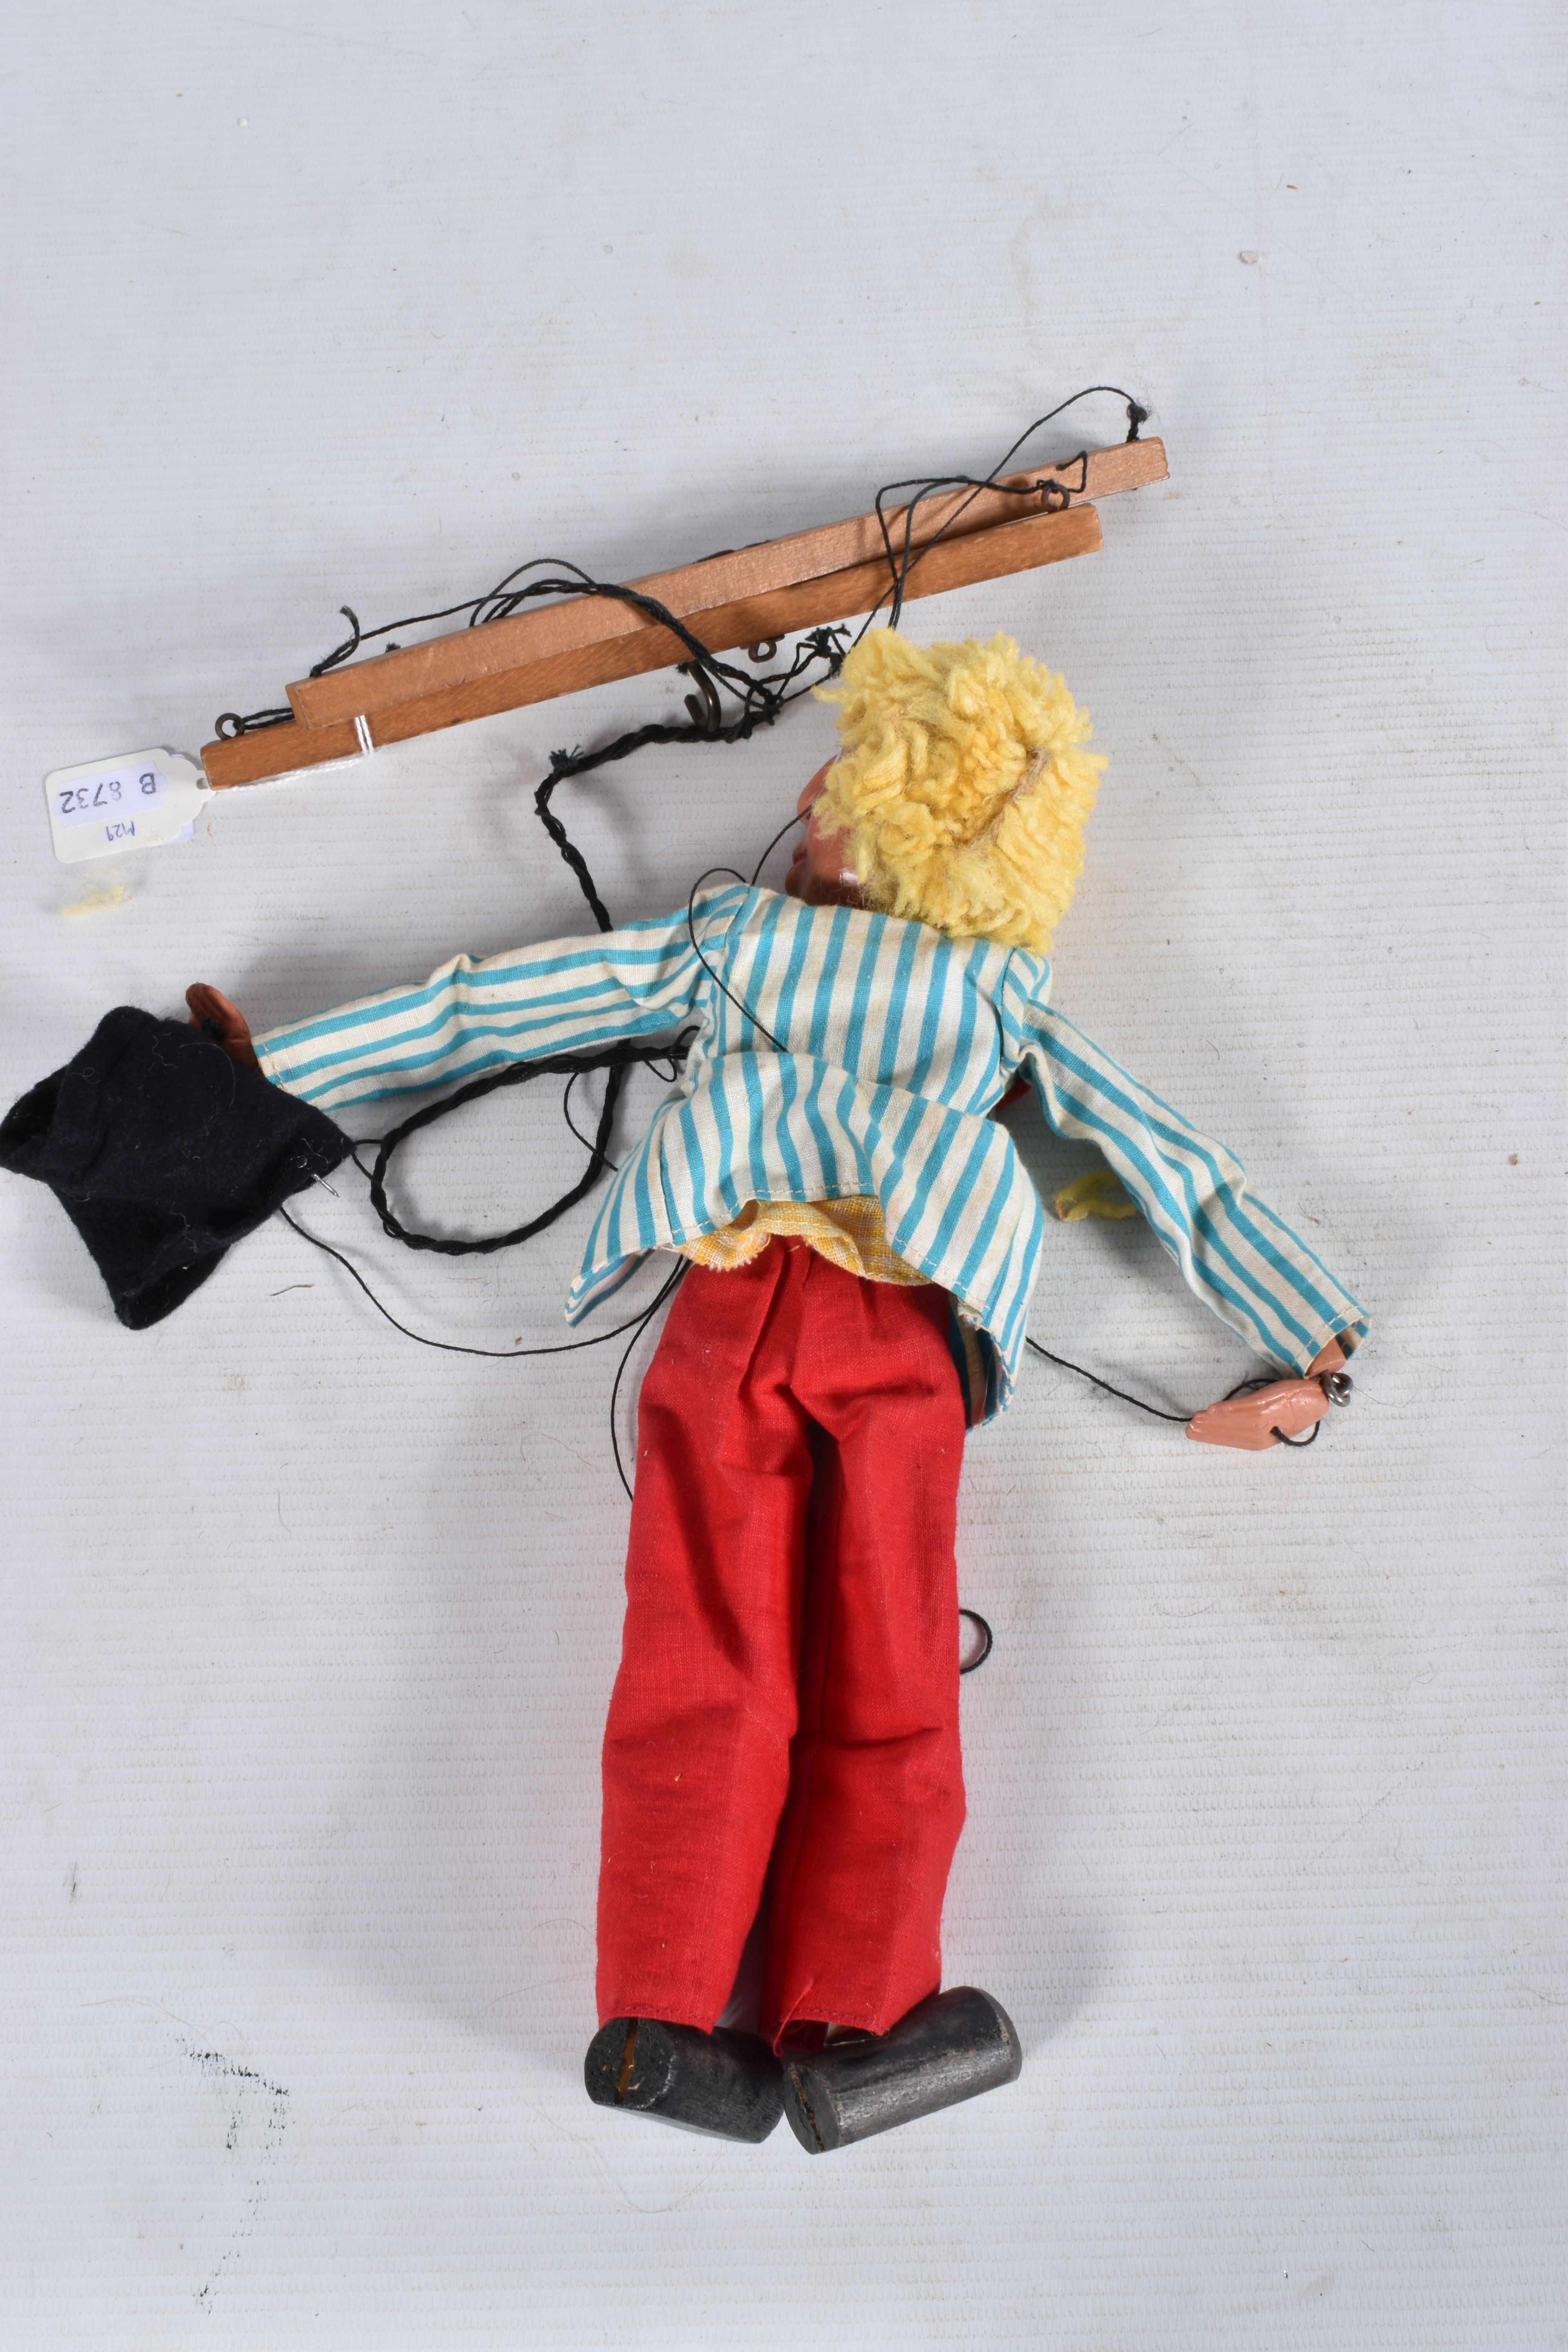 A BOXED PELHAM SL MAD HATTER PUPPET, appears complete and in fairly good condition, with only - Image 8 of 9